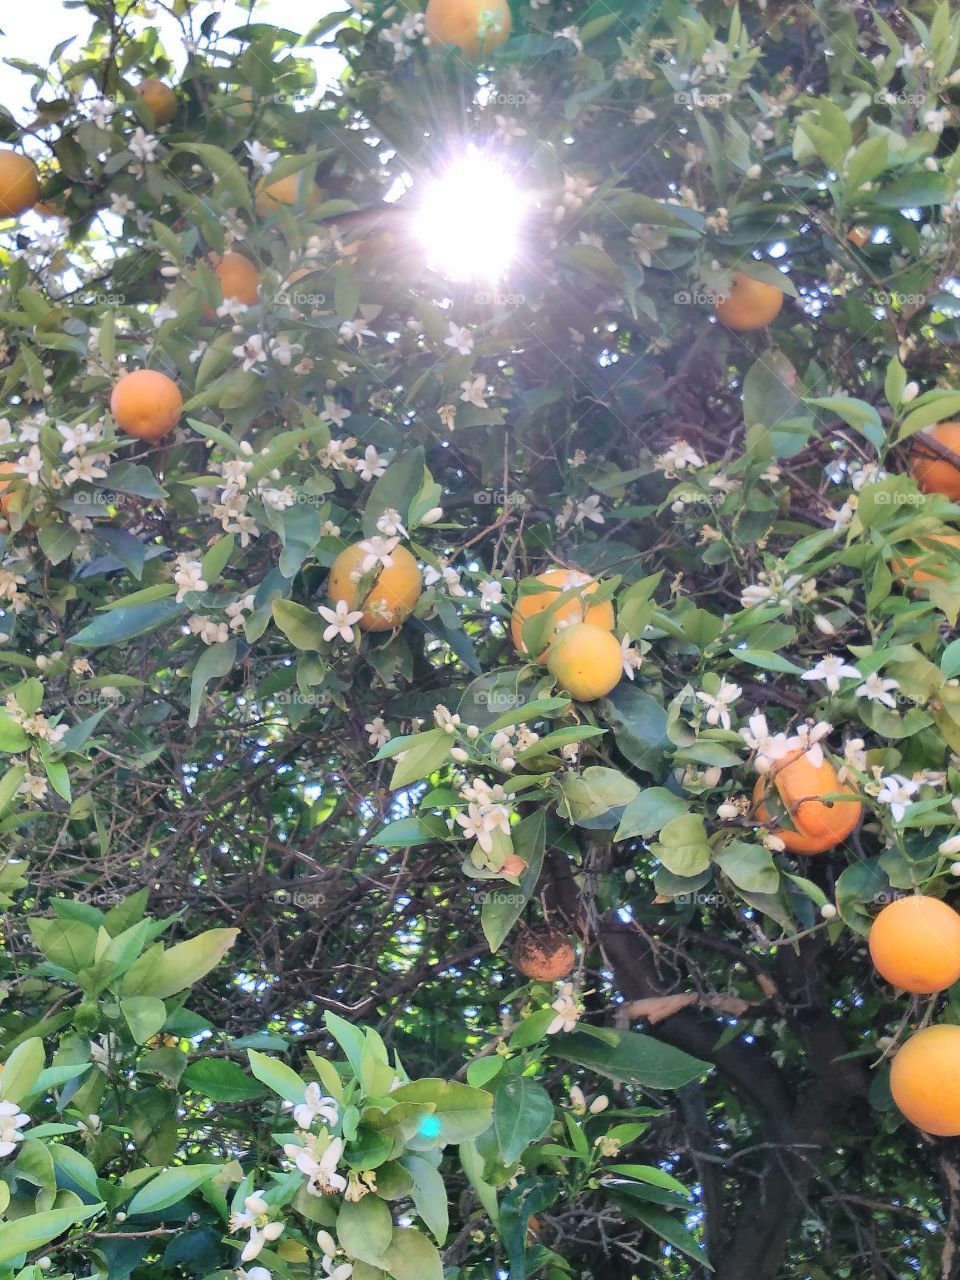 Smell the oranges in the sunshine